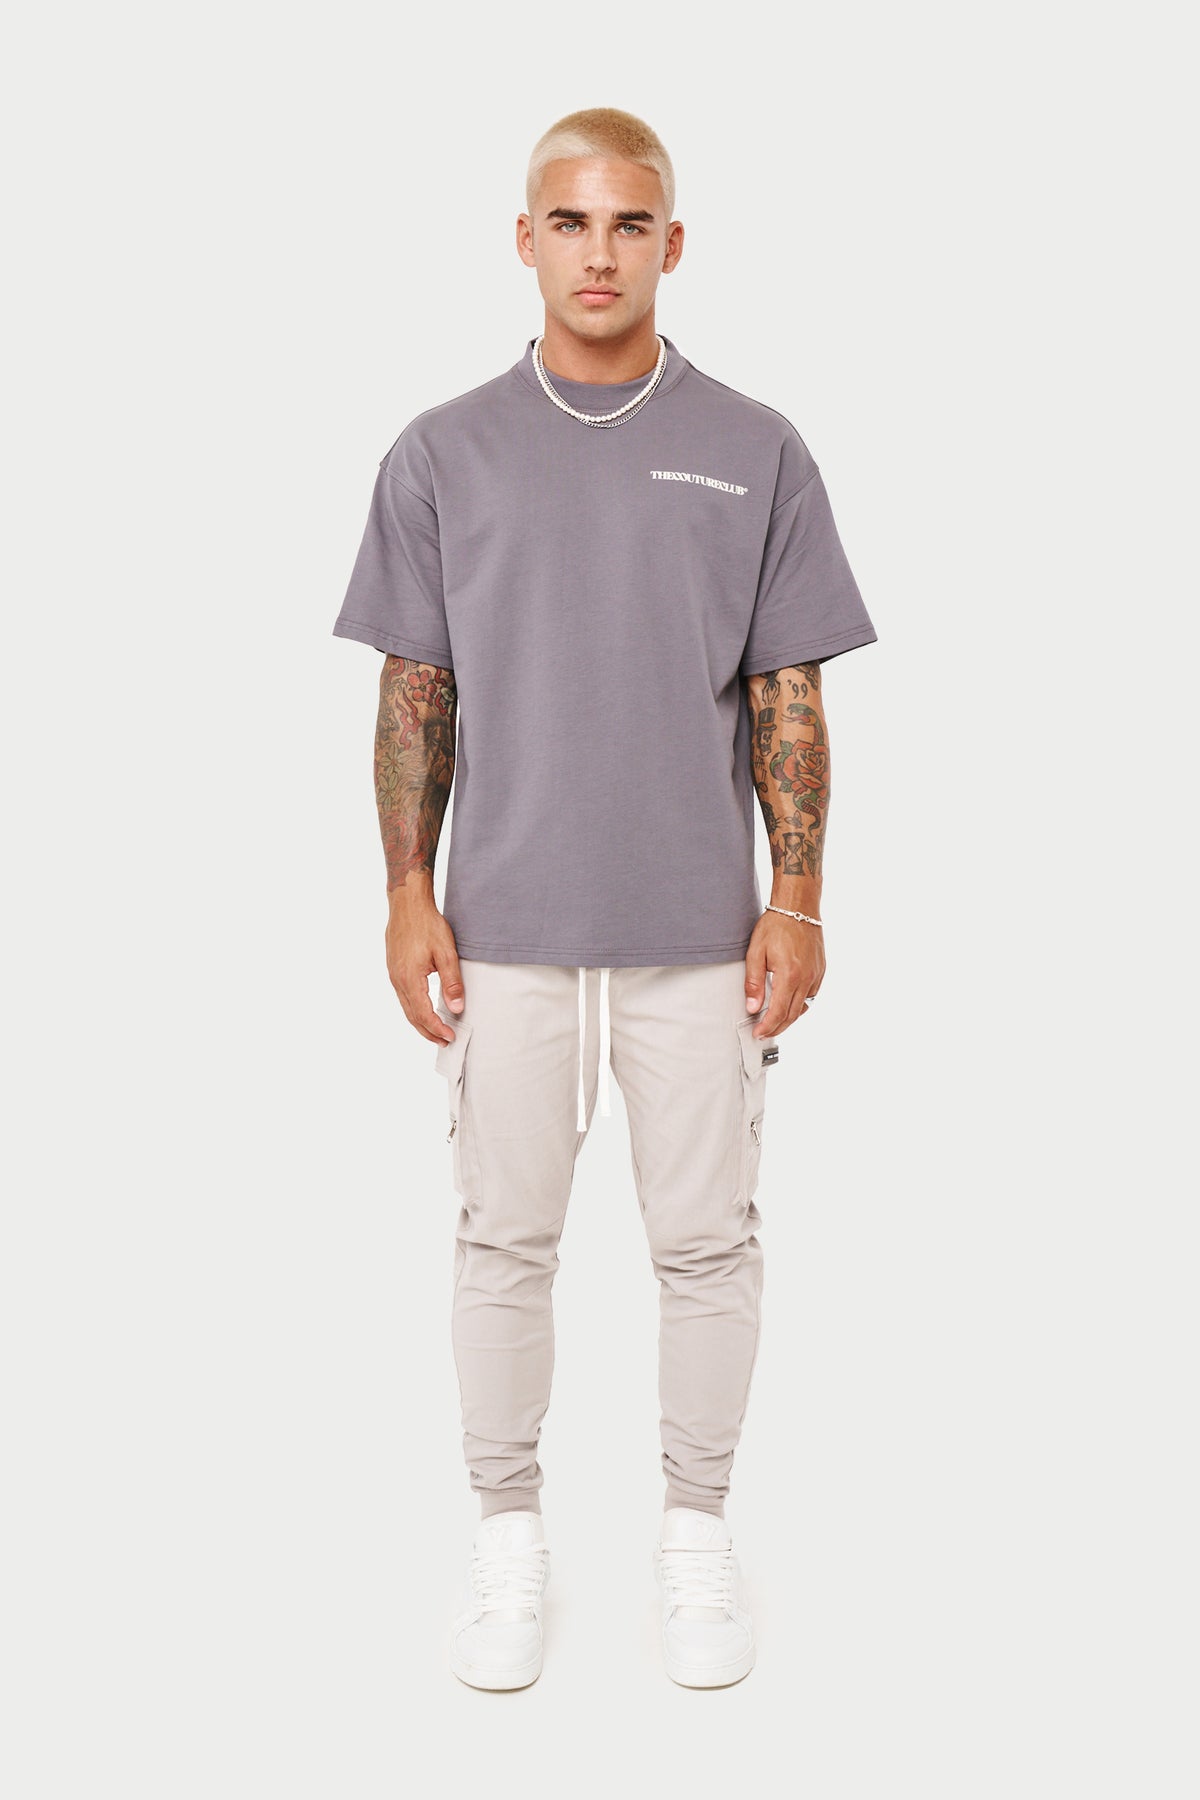 The Couture Club 3D pocket t-shirt in gray